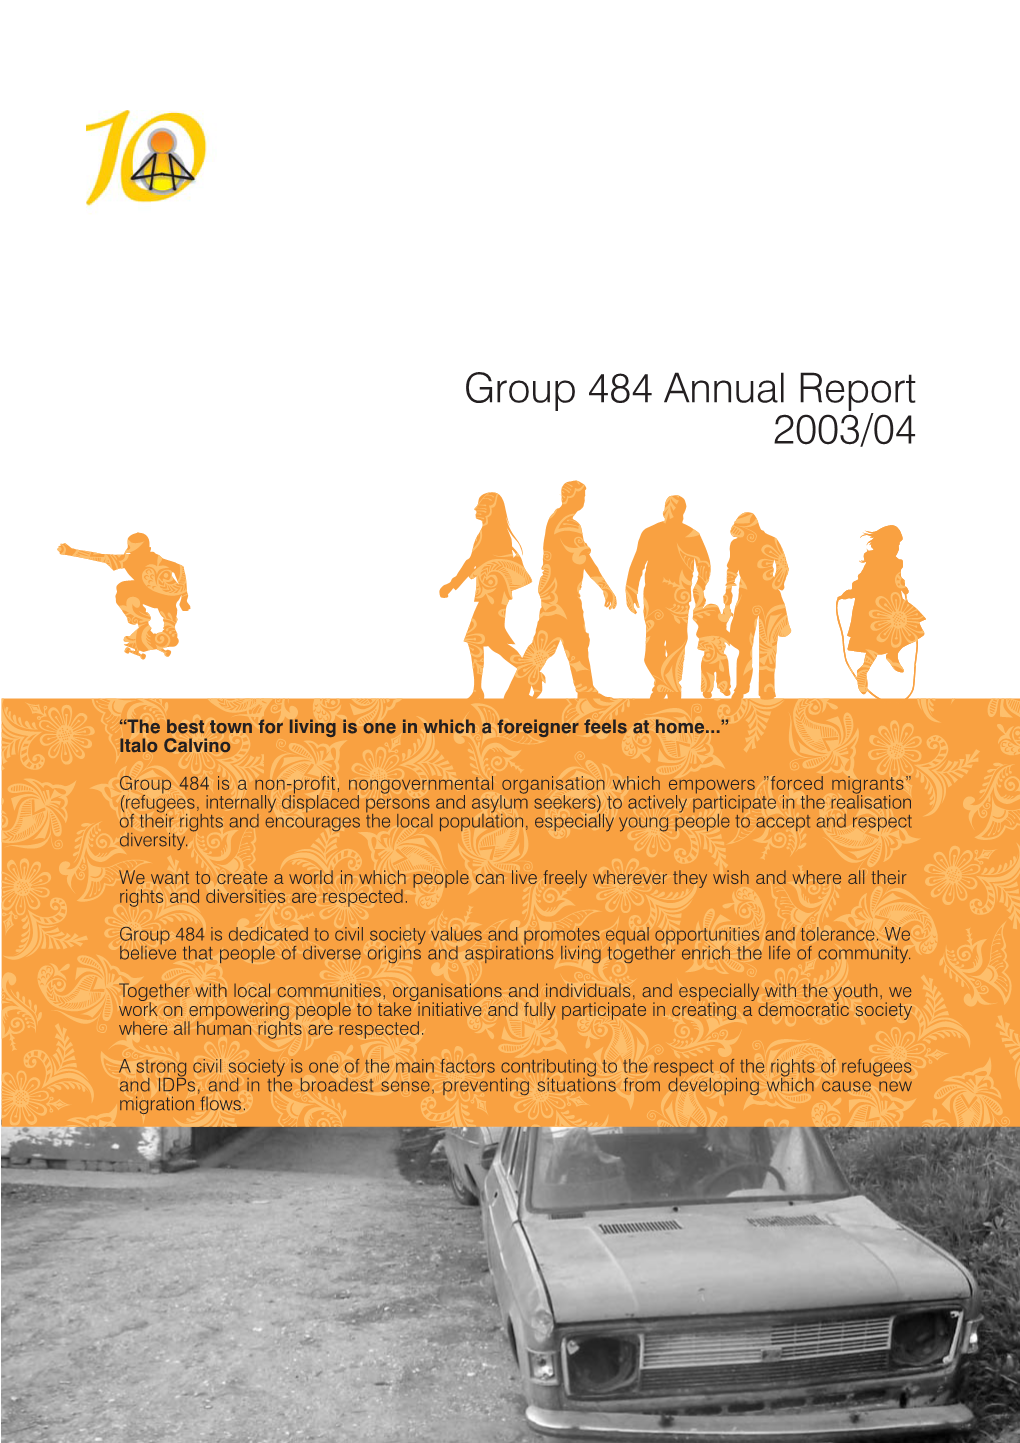 Group 484 Annual Report 2003/04